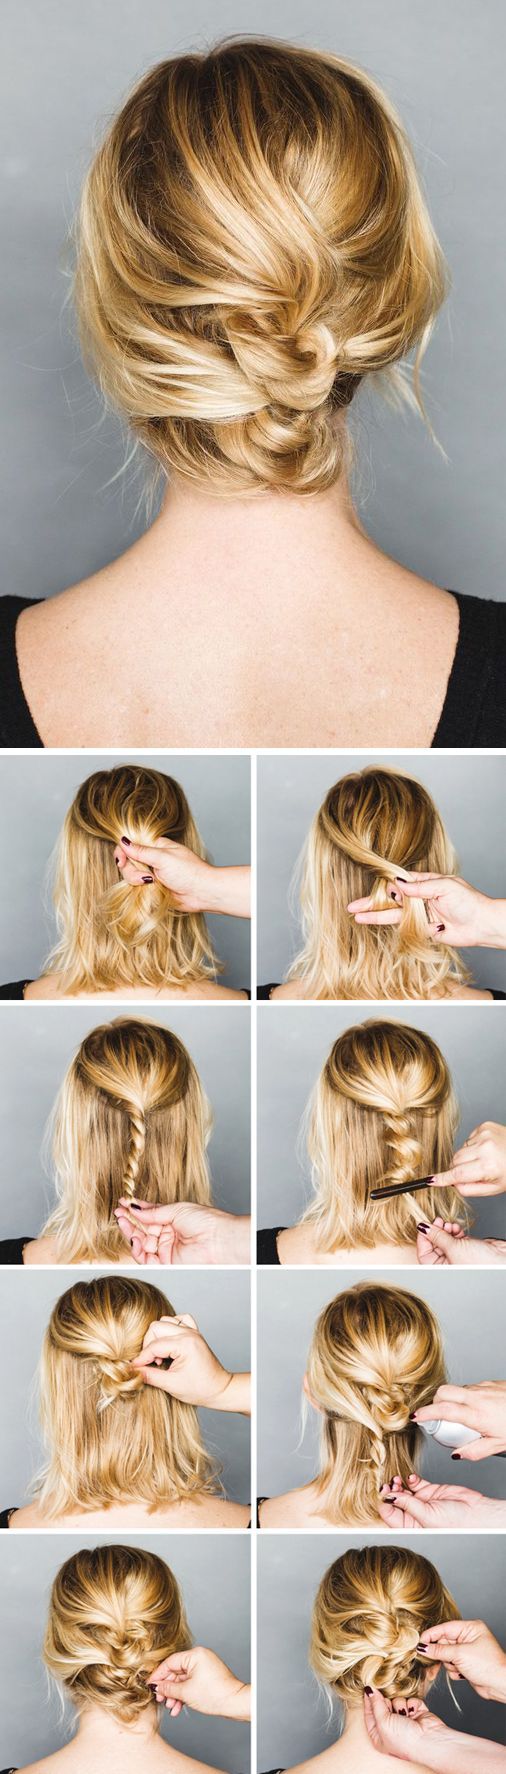 DIY Twisted Messy Updo | 5 Messy Updos for Long Hair, check it out at makeuptuto...